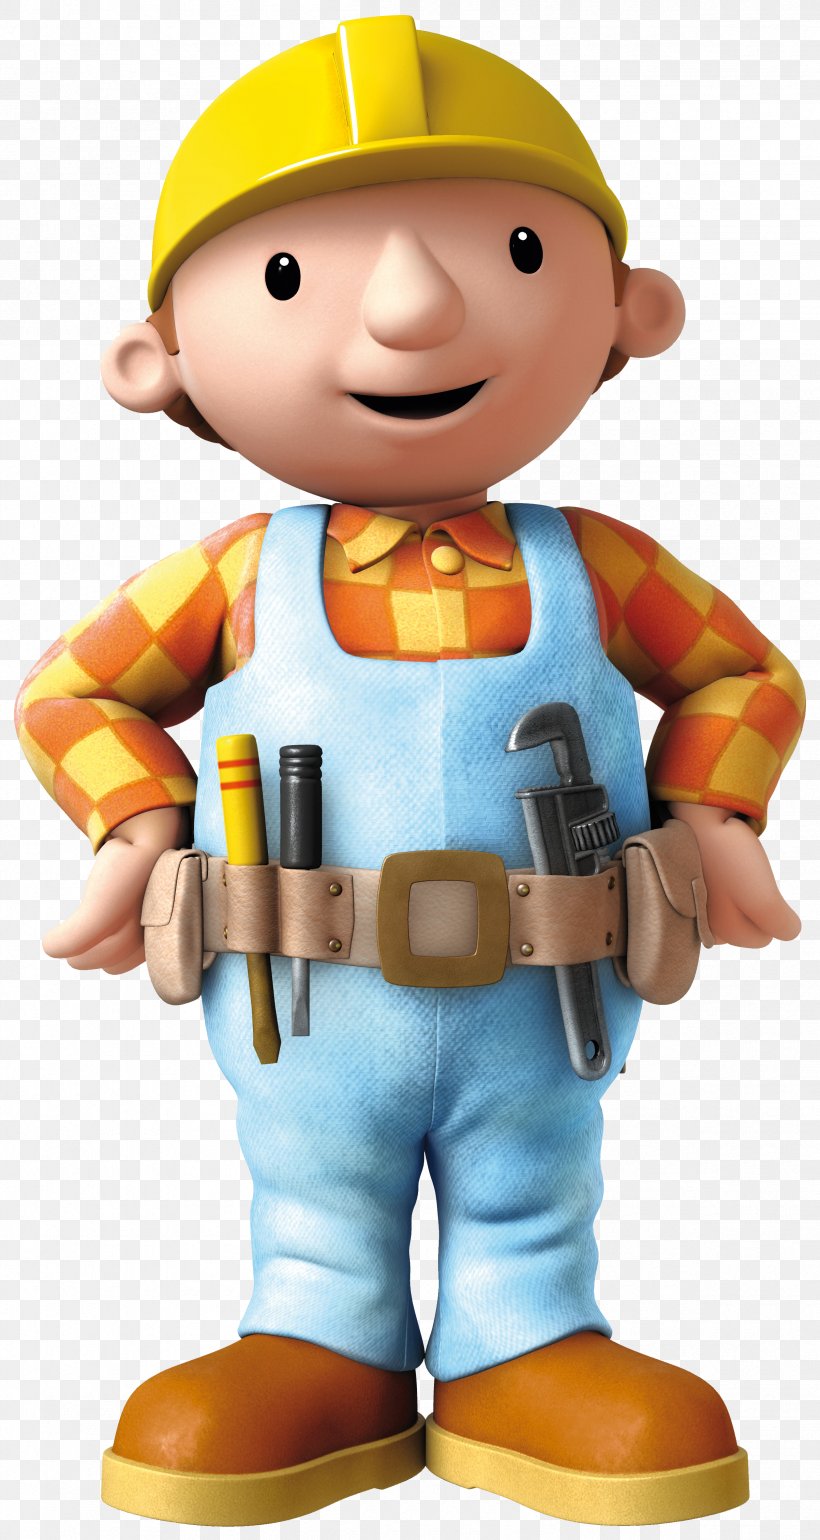 Bob The Builder T-shirt Child Boy Toy, PNG, 2405x4518px, Bob The Builder, Boy, Child, Children S Television Series, Construction Worker Download Free